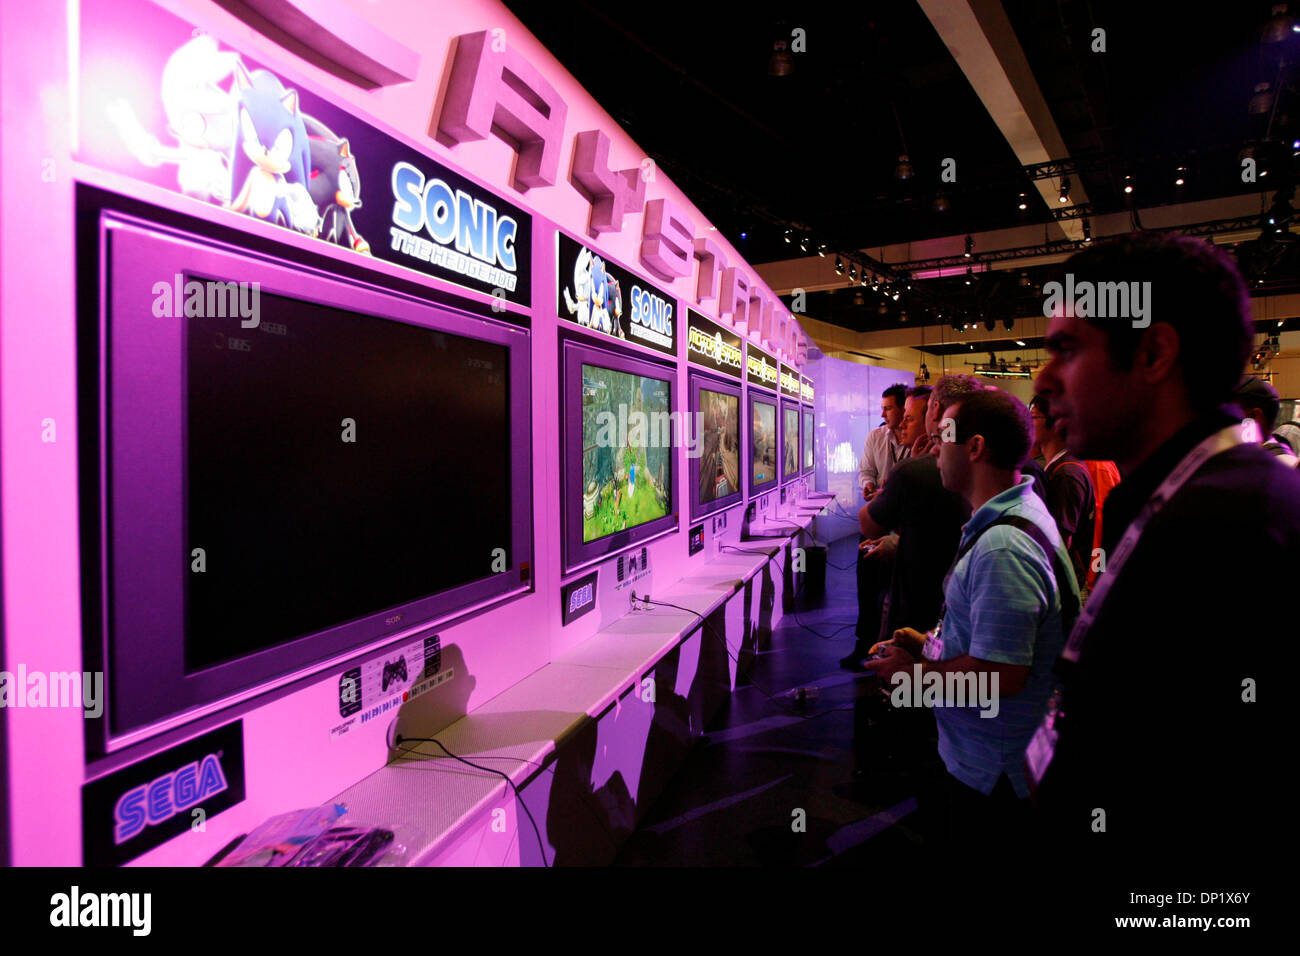 May 11, 2006; Los Angeles, CA, USA; Sony featured its new Playstation 3 at the recent trade-only E3 video game expo in Los Angeles. Mandatory Credit: Photo by Mike Fox/ZUMA Press. (©) Copyright 2006 by Mike Fox Stock Photo